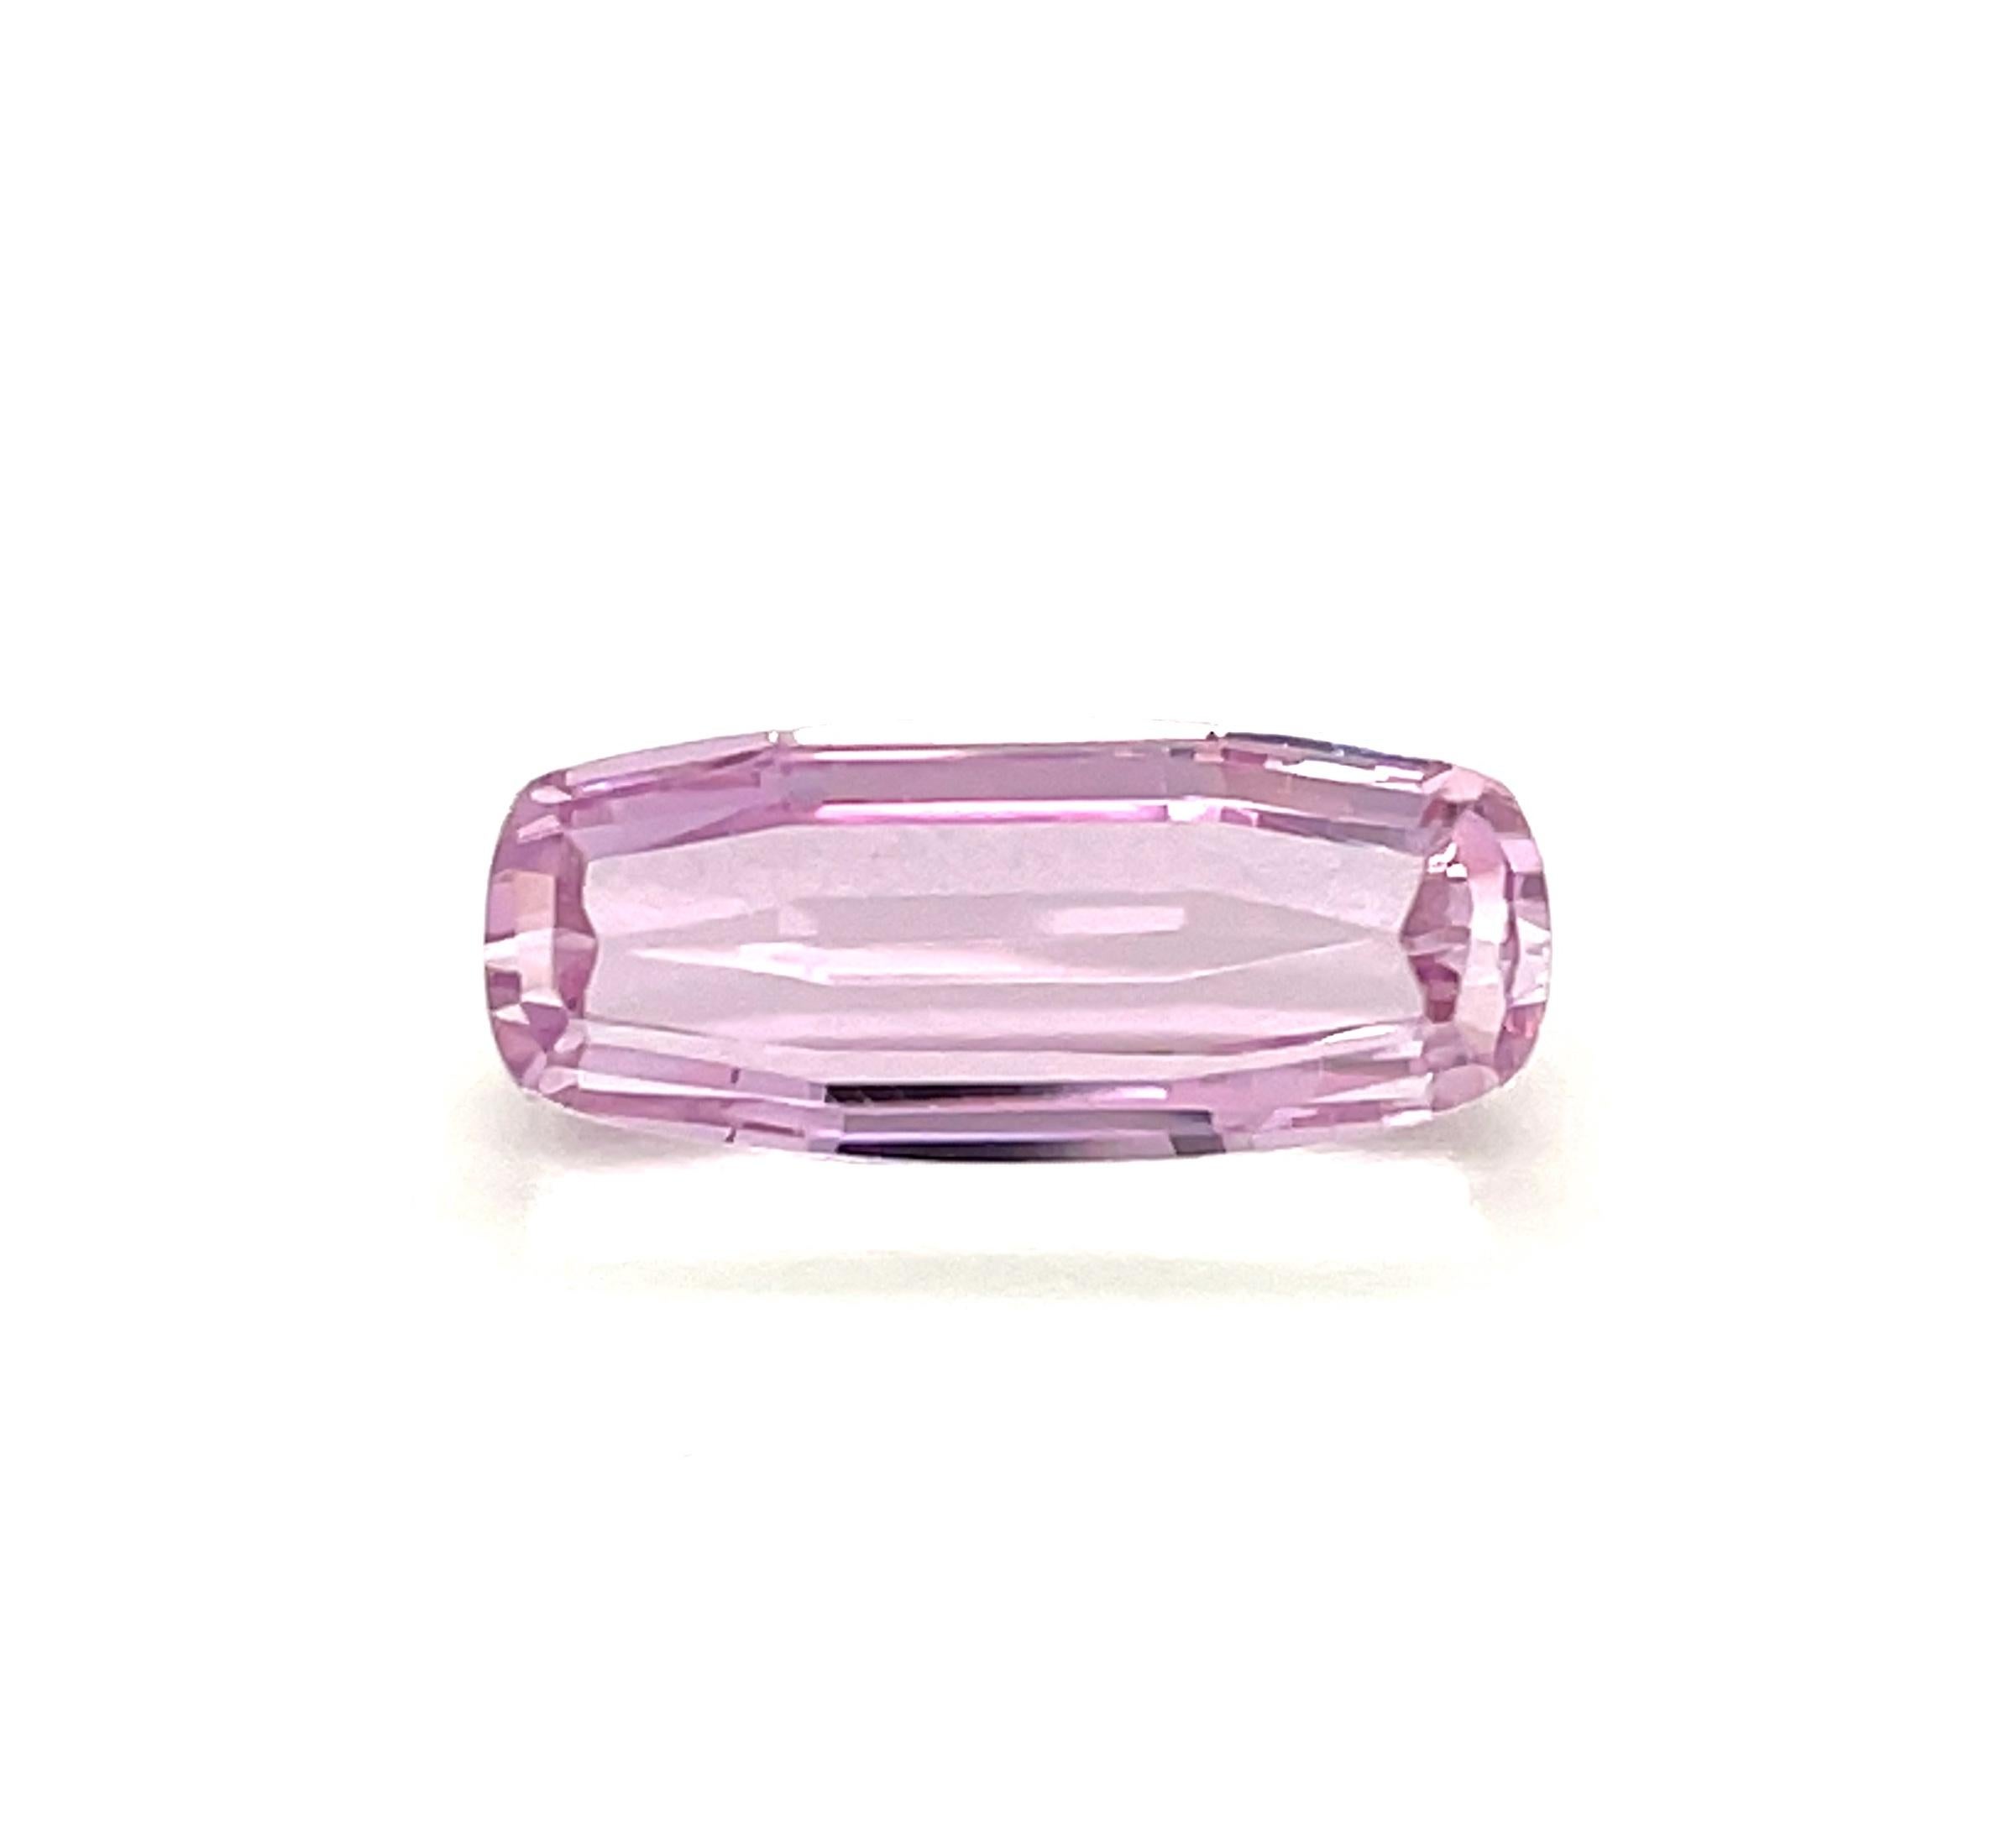 This pretty cherry blossom pink kunzite weighs 10.17 carats and would make a beautiful ring or pendant! It is a faceted designer cut, which shows off its beautiful crystalline nature and clarity. This gemstone measures 18.48 x 7.73 x 7.07mm and